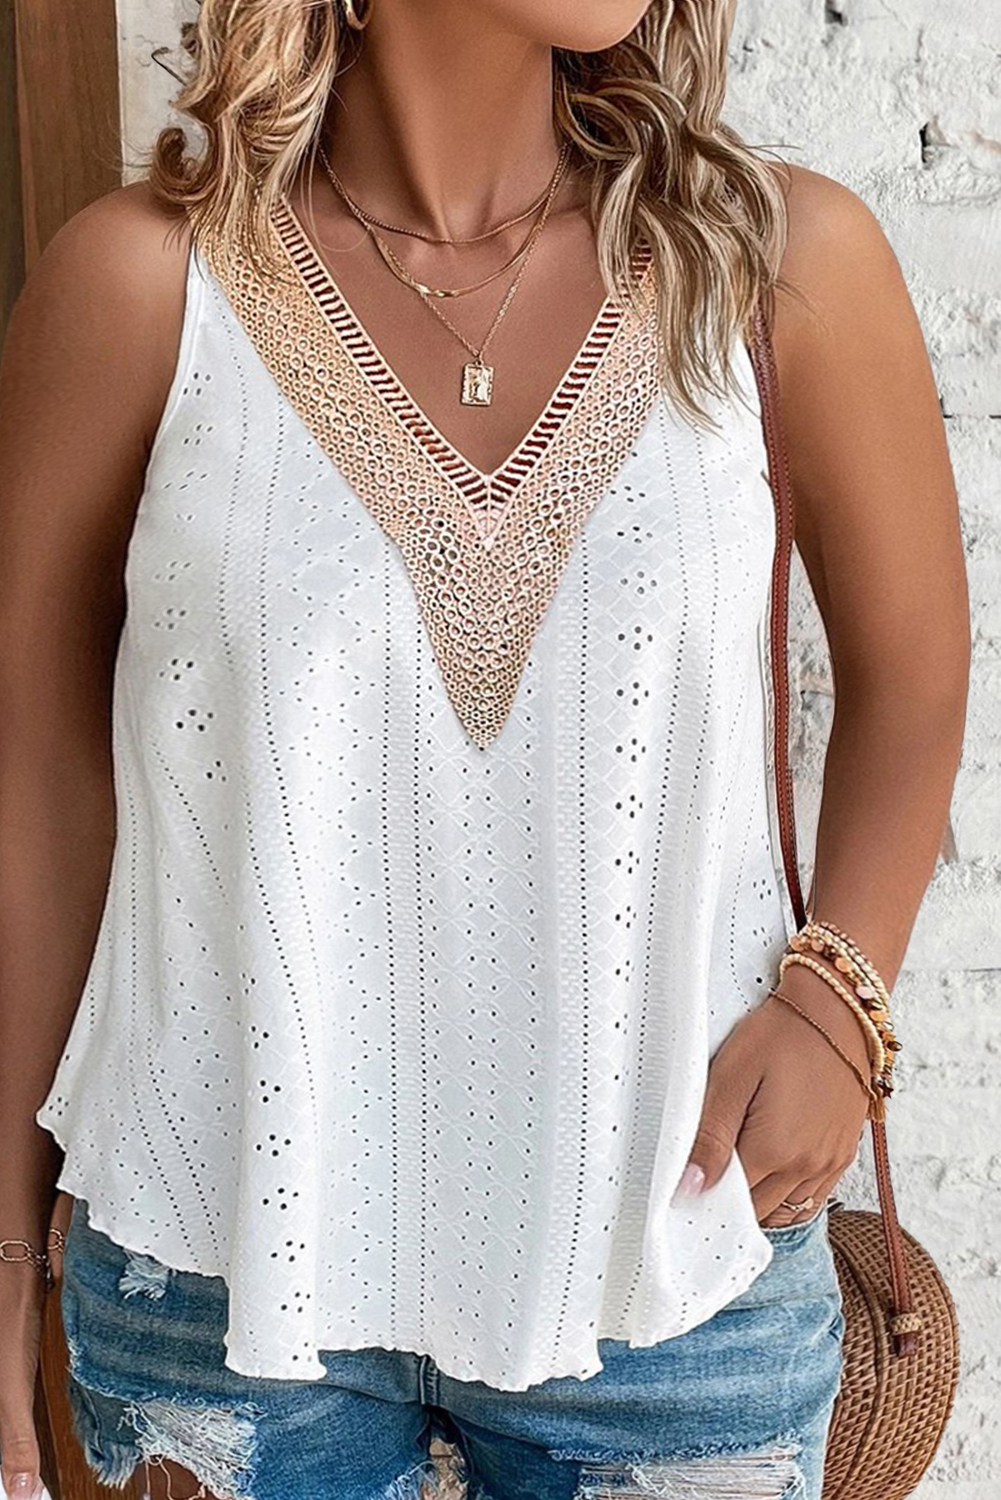 Shewin Wholesale Casual White Plus Size Guipure V Neck Eyelet Lace TANK TOP